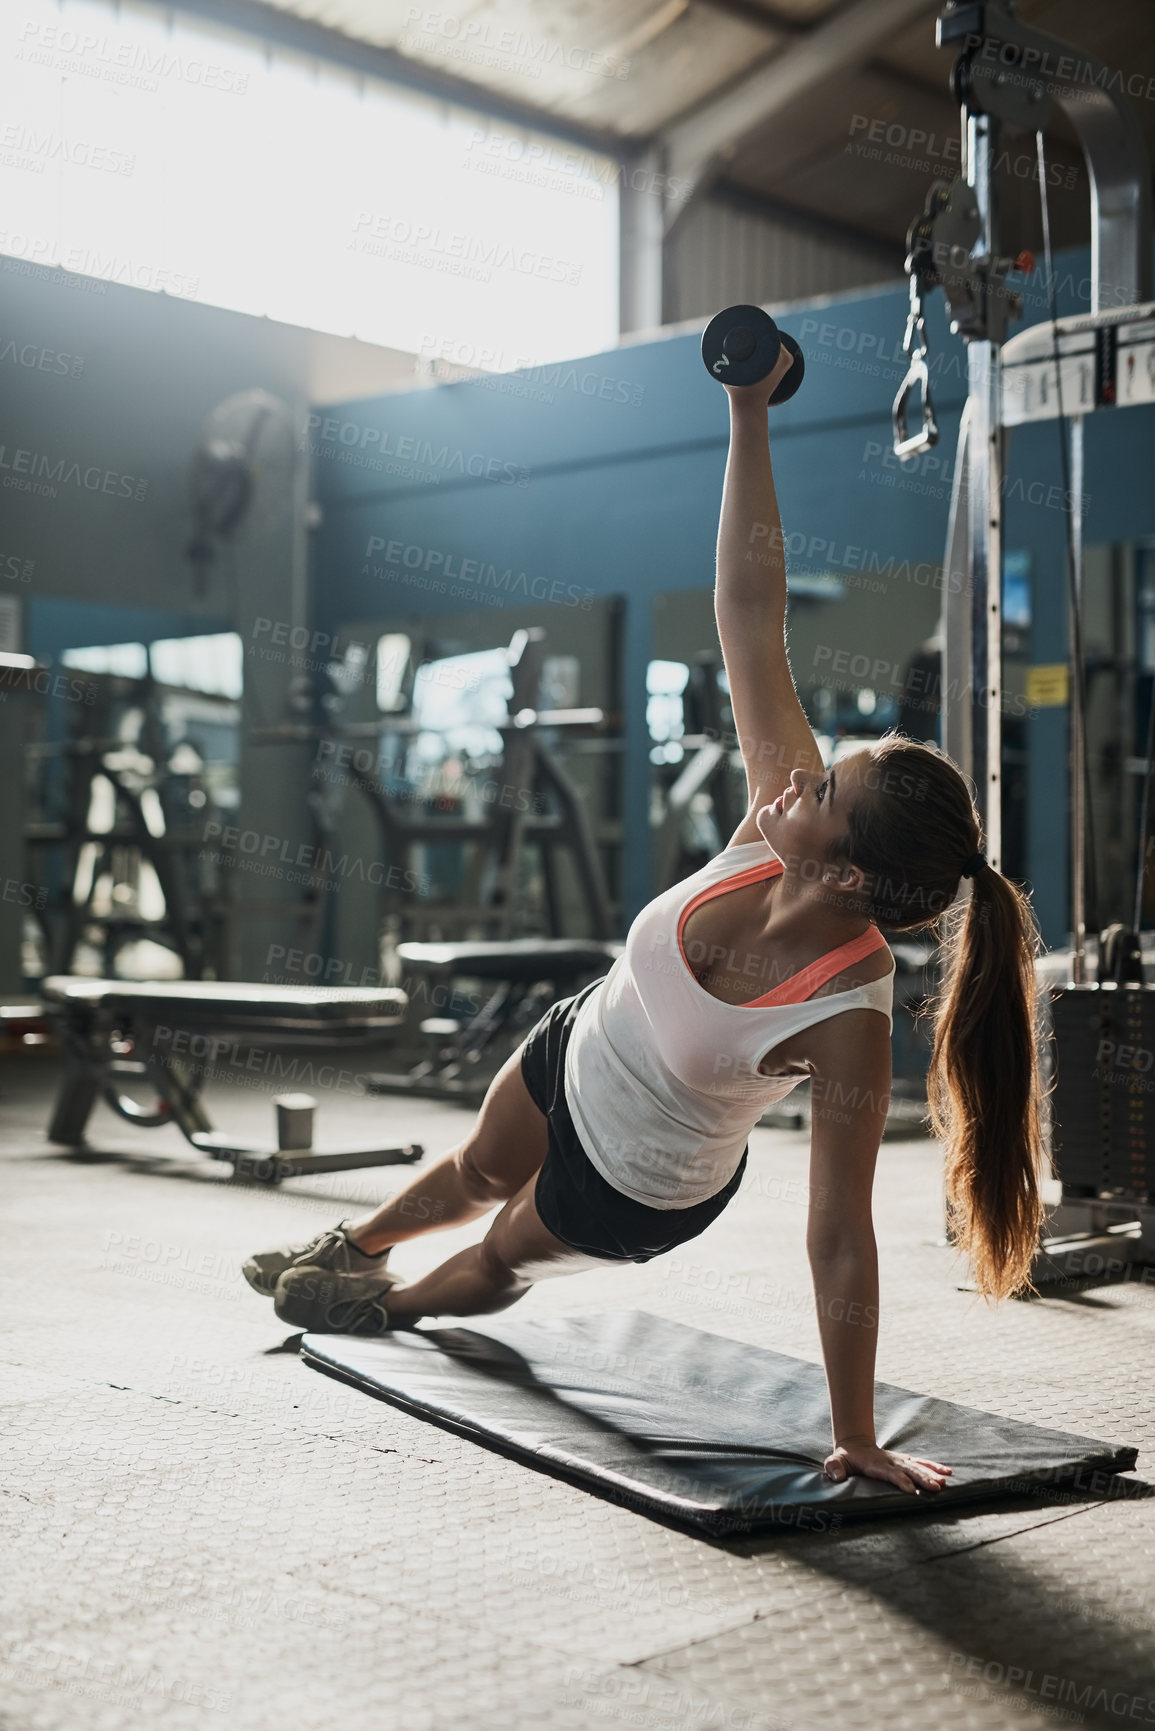 Buy stock photo Shot of a young woman working out with weights at the gym